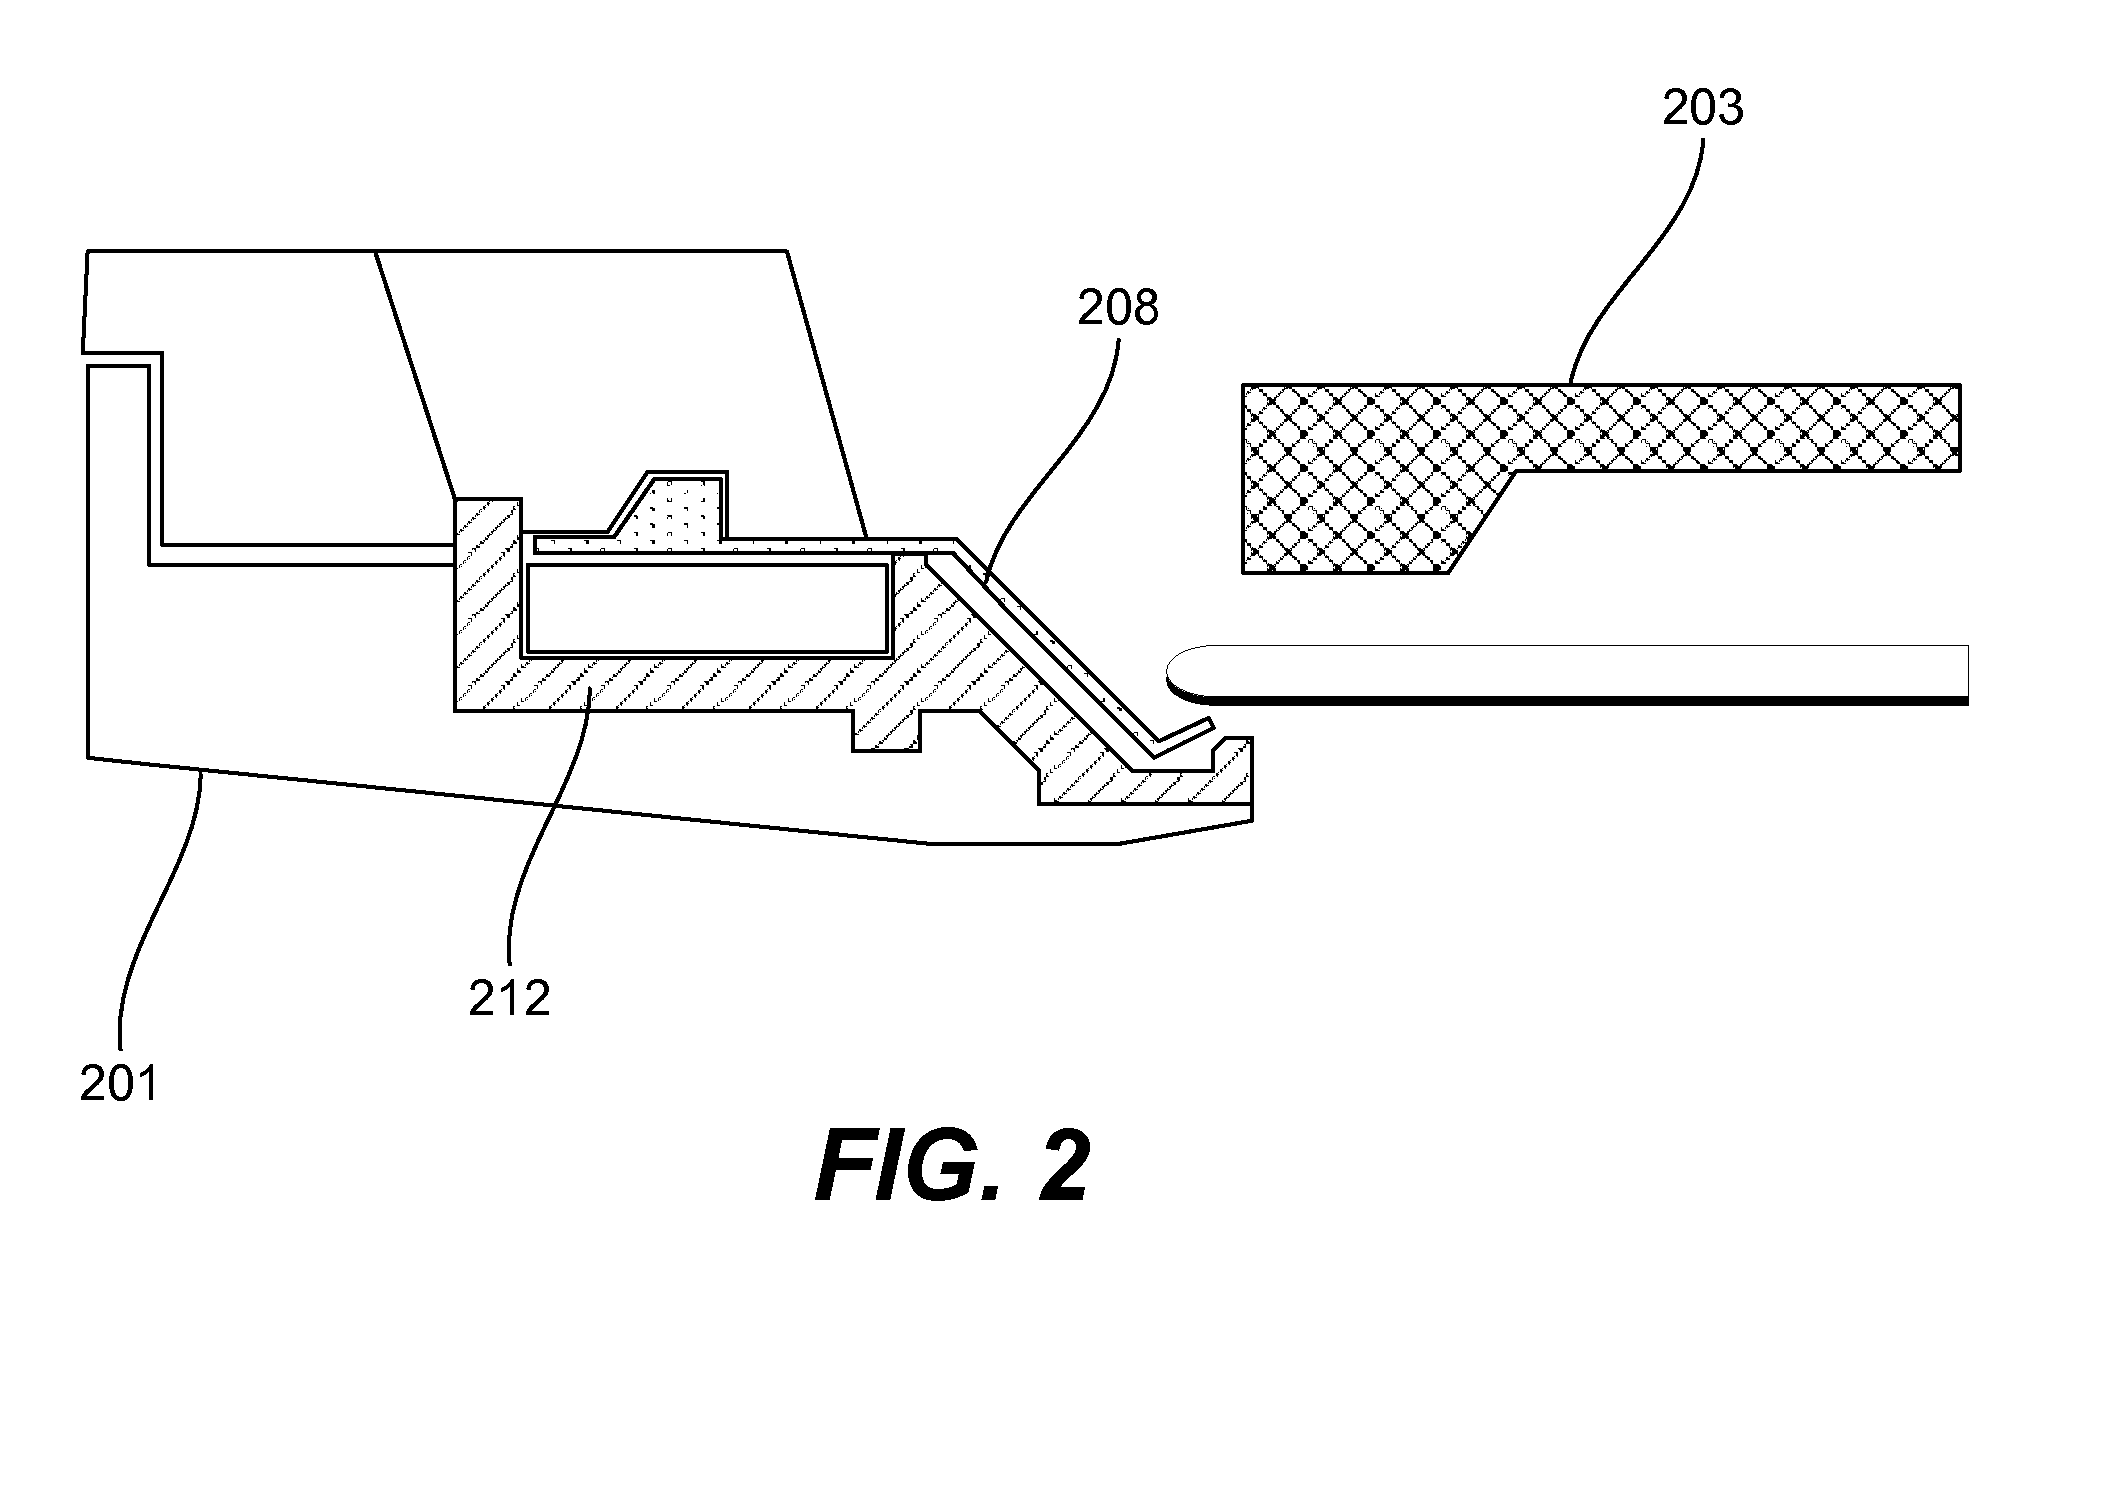 Lipseals and contact elements for semiconductor electroplating apparatuses